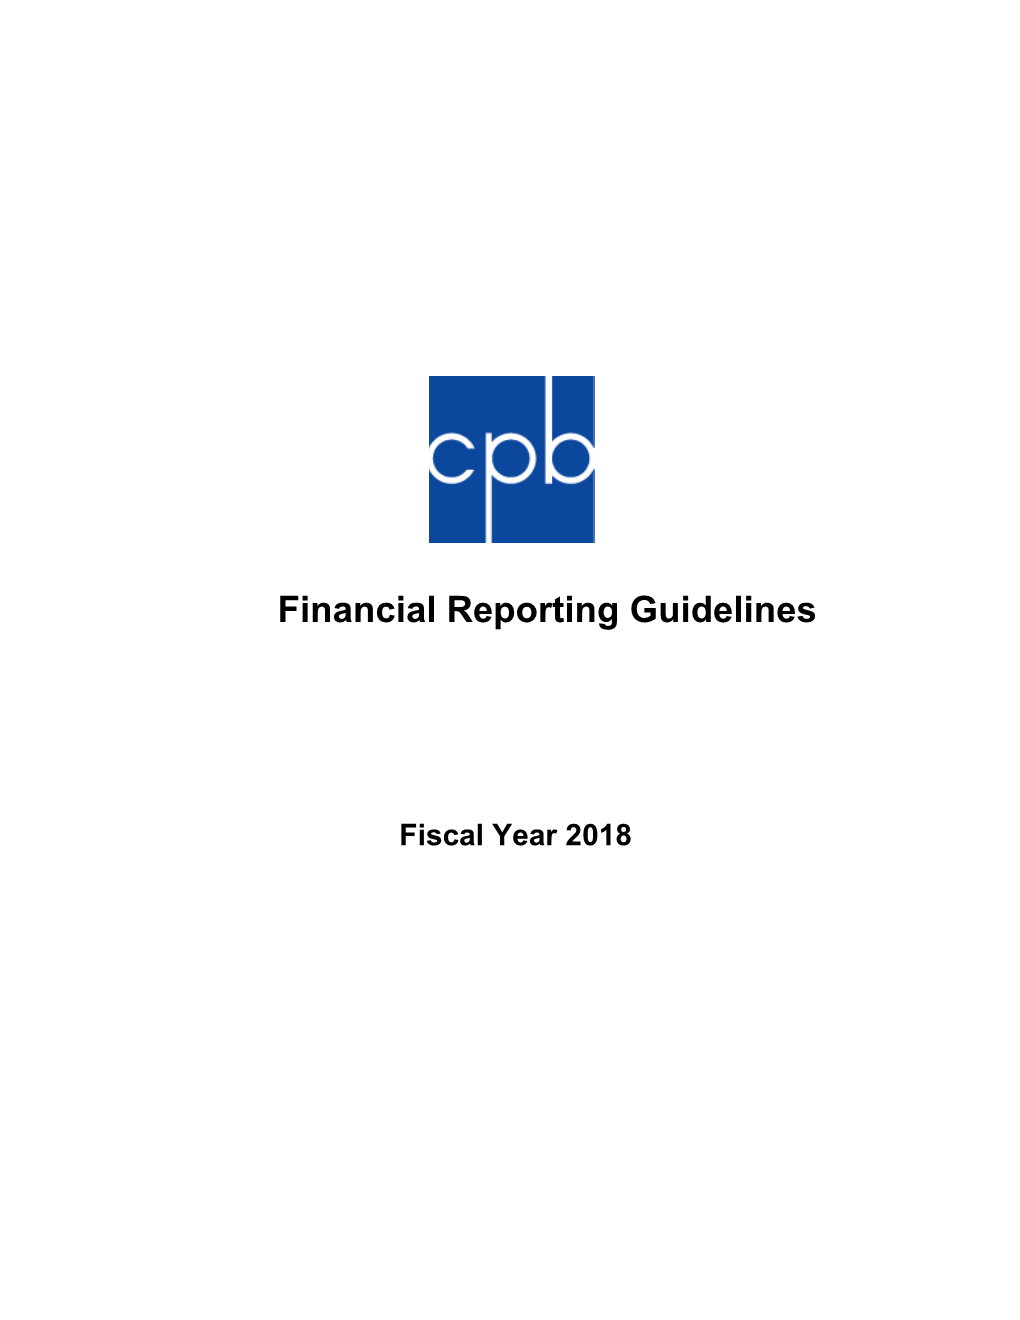 2018 Financial Reporting Guidelines